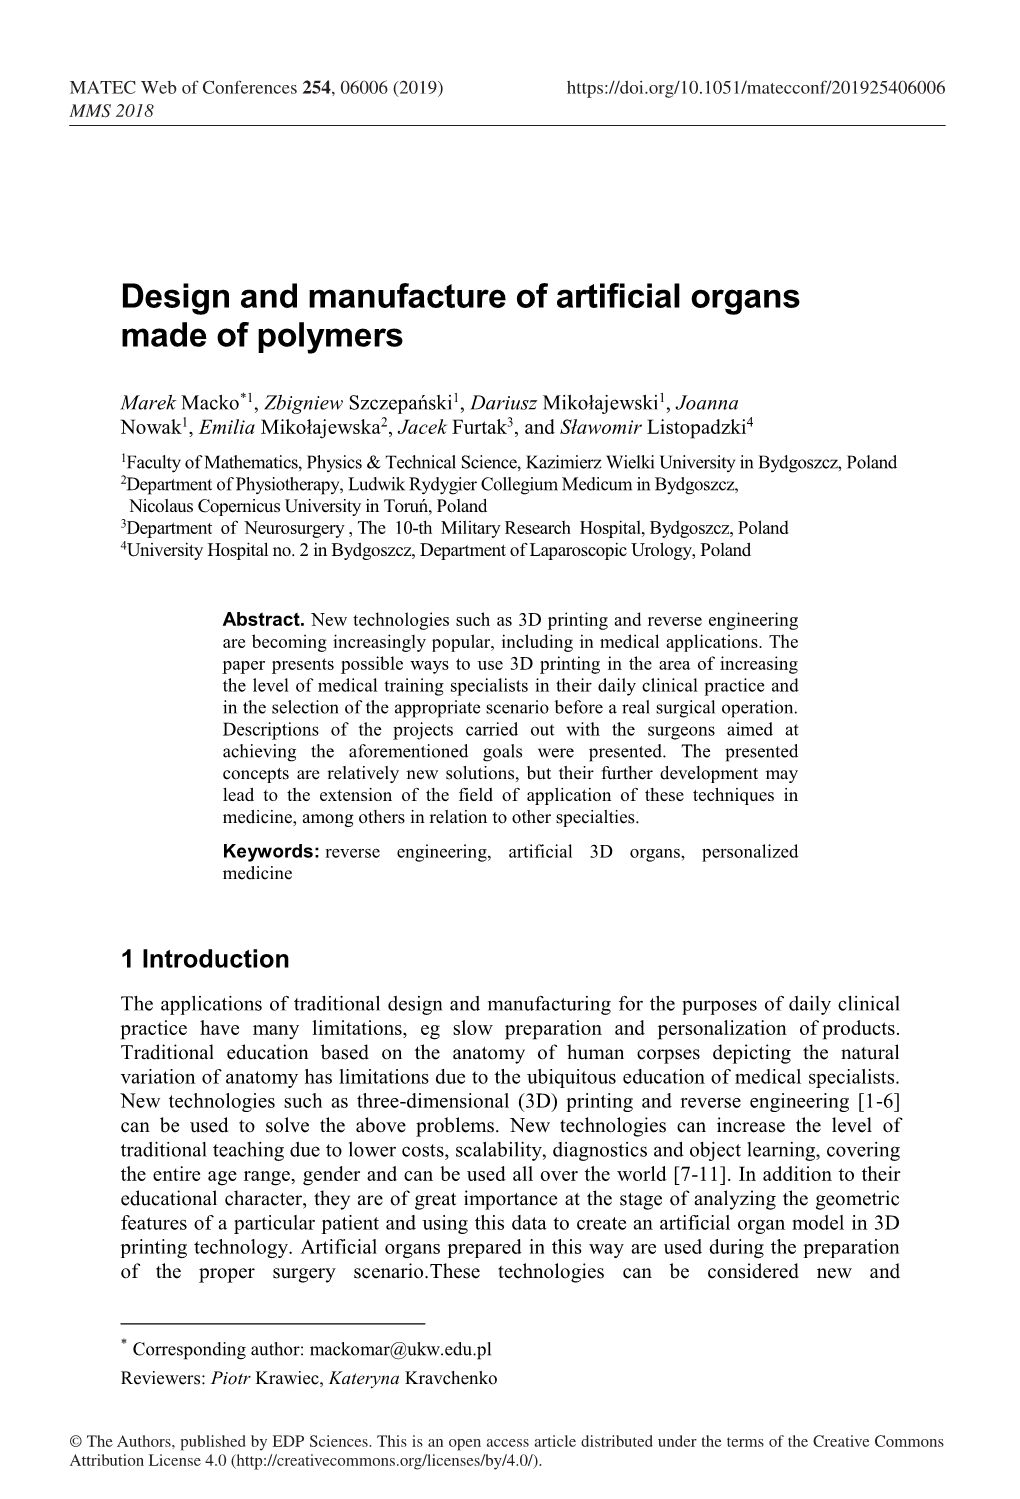 Design and Manufacture of Artificial Organs Made of Polymers